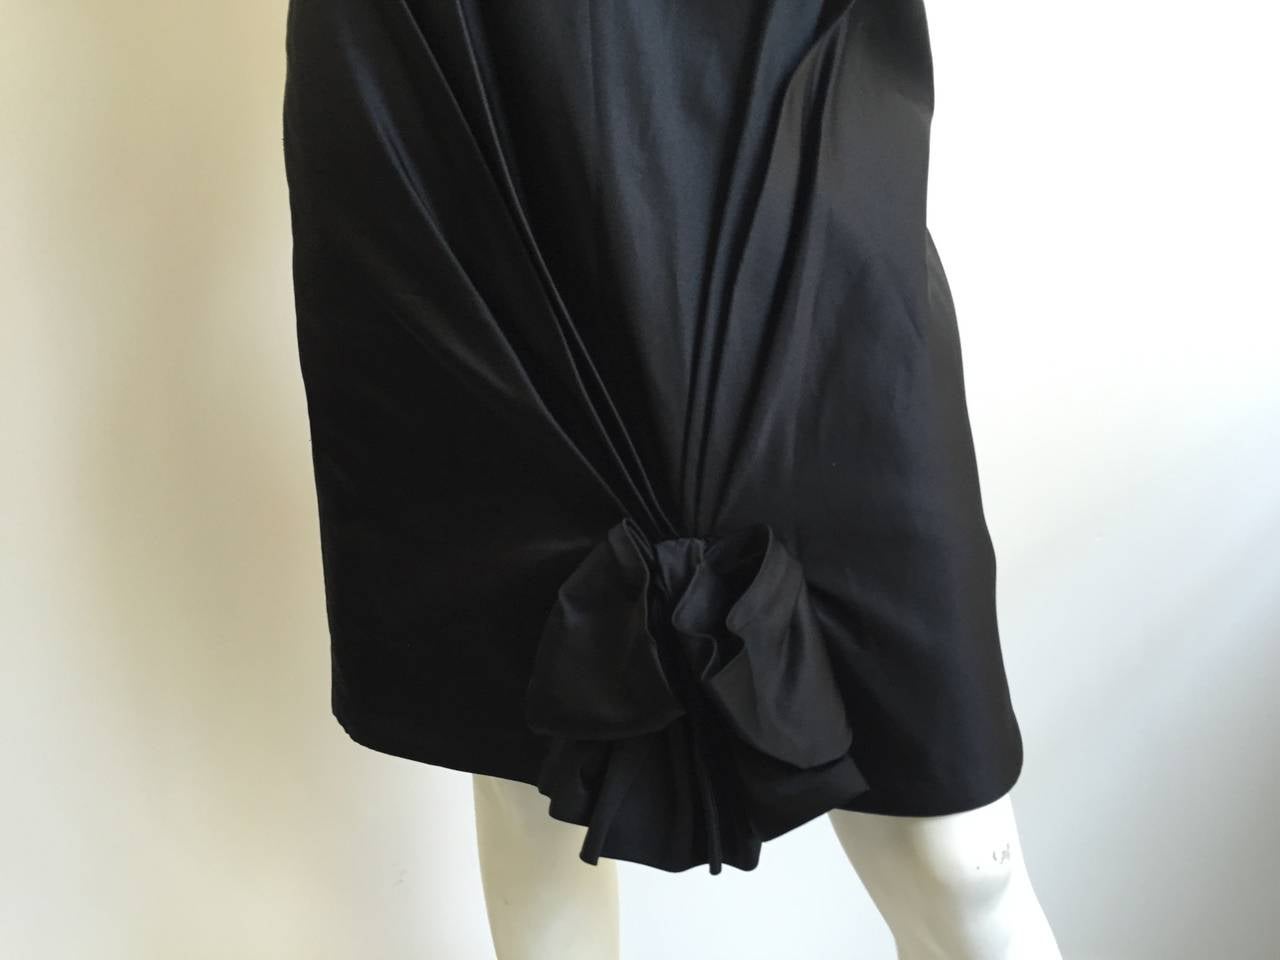 Bill Blass 1970s black silk gathered fabric evening skirt with bow in front size 4 ( Please see & use measurements). Skirt is lined. 
Measurements are:
27" waist
34" hips
24" skirt height.